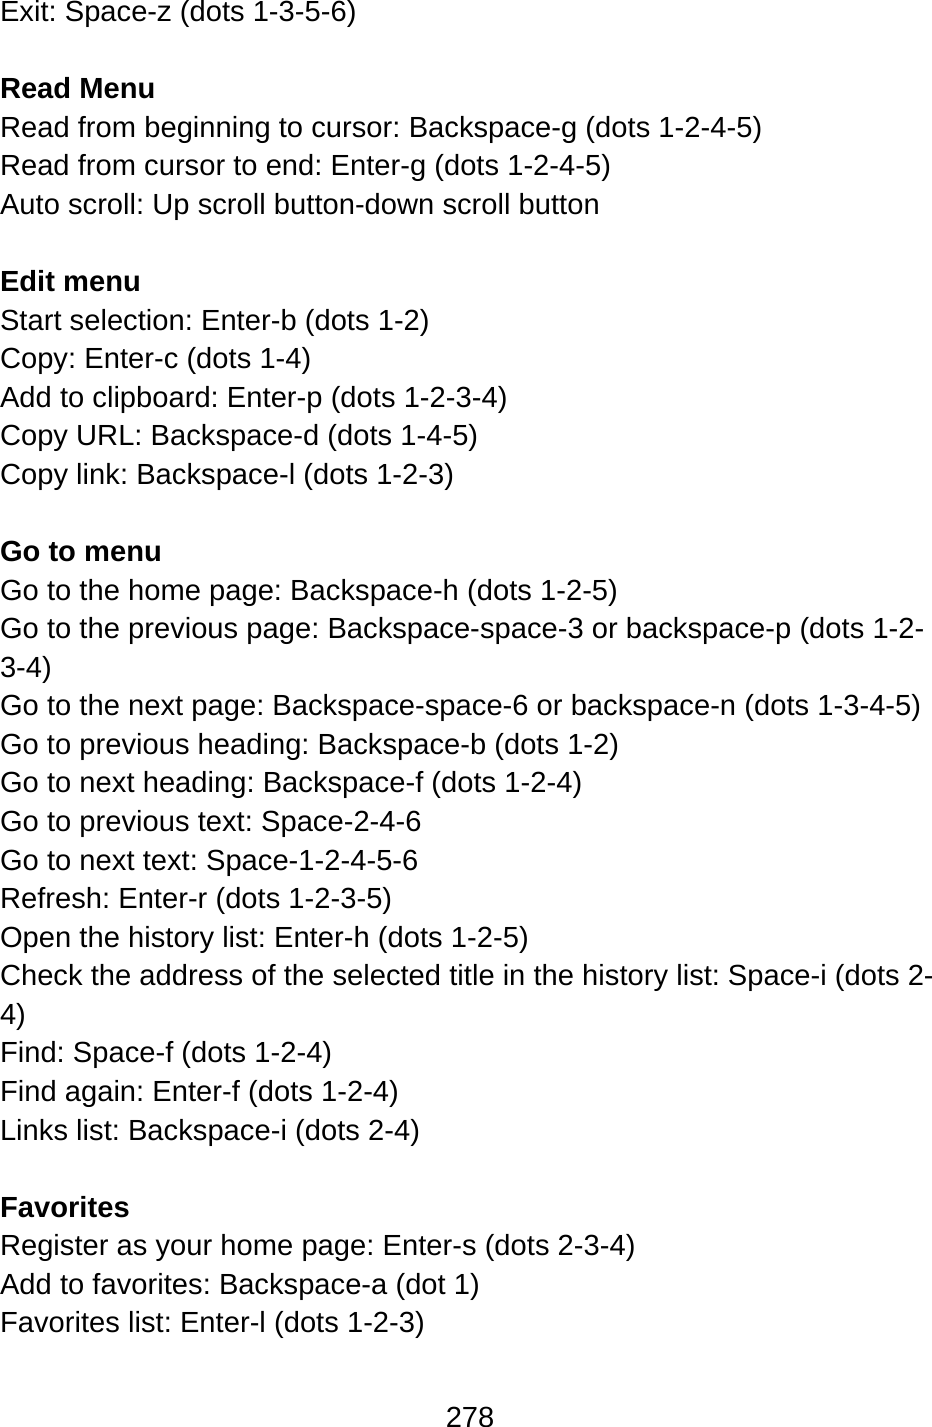 278  Exit: Space-z (dots 1-3-5-6)  Read Menu Read from beginning to cursor: Backspace-g (dots 1-2-4-5) Read from cursor to end: Enter-g (dots 1-2-4-5) Auto scroll: Up scroll button-down scroll button  Edit menu Start selection: Enter-b (dots 1-2) Copy: Enter-c (dots 1-4) Add to clipboard: Enter-p (dots 1-2-3-4) Copy URL: Backspace-d (dots 1-4-5) Copy link: Backspace-l (dots 1-2-3)  Go to menu Go to the home page: Backspace-h (dots 1-2-5) Go to the previous page: Backspace-space-3 or backspace-p (dots 1-2-3-4) Go to the next page: Backspace-space-6 or backspace-n (dots 1-3-4-5) Go to previous heading: Backspace-b (dots 1-2) Go to next heading: Backspace-f (dots 1-2-4) Go to previous text: Space-2-4-6 Go to next text: Space-1-2-4-5-6 Refresh: Enter-r (dots 1-2-3-5) Open the history list: Enter-h (dots 1-2-5) Check the address of the selected title in the history list: Space-i (dots 2-4) Find: Space-f (dots 1-2-4) Find again: Enter-f (dots 1-2-4) Links list: Backspace-i (dots 2-4)  Favorites Register as your home page: Enter-s (dots 2-3-4) Add to favorites: Backspace-a (dot 1) Favorites list: Enter-l (dots 1-2-3)  